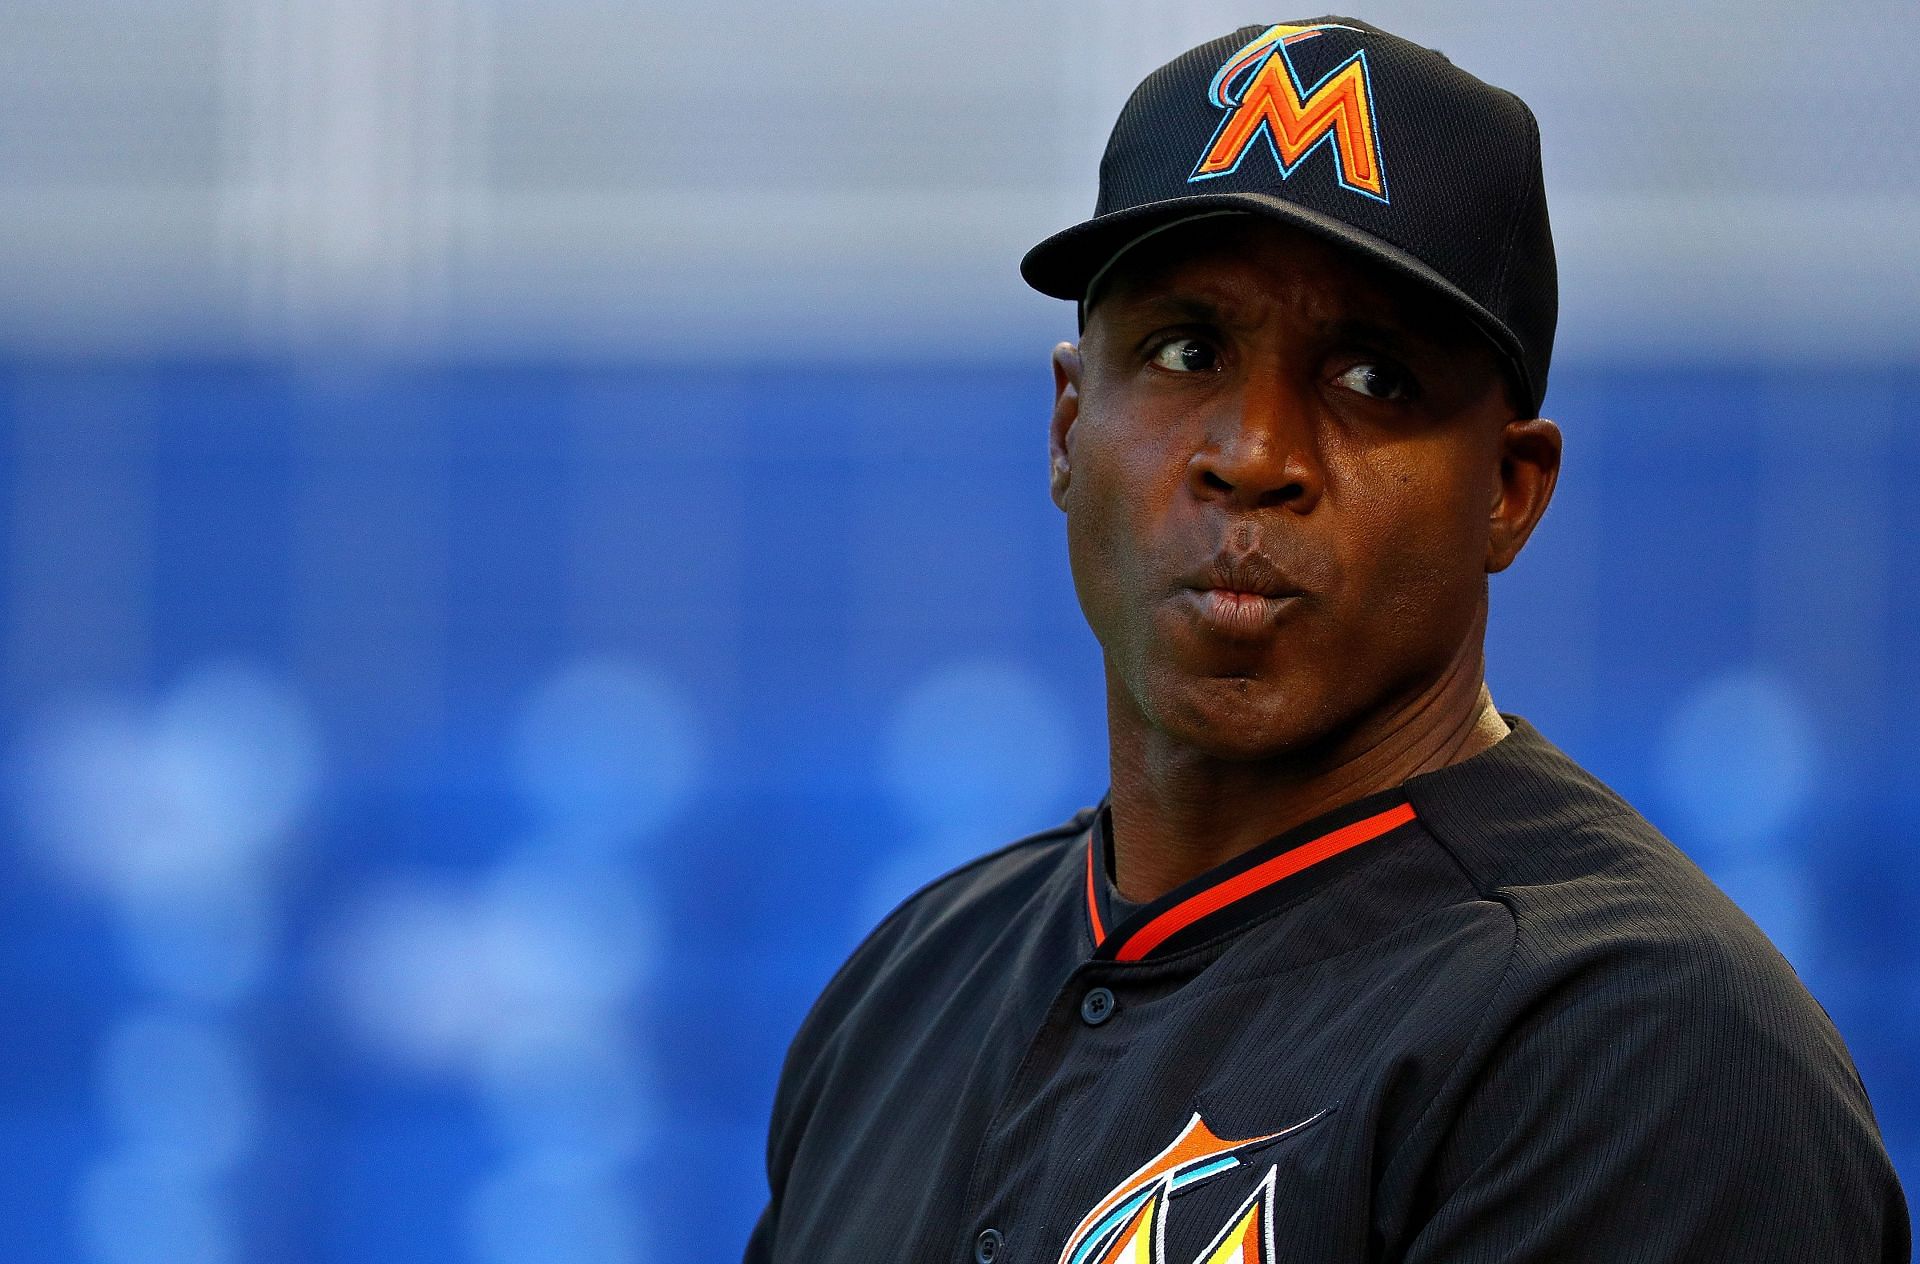 The Barry Bonds documentary will most likely be about his involvement with the steroids scanal.